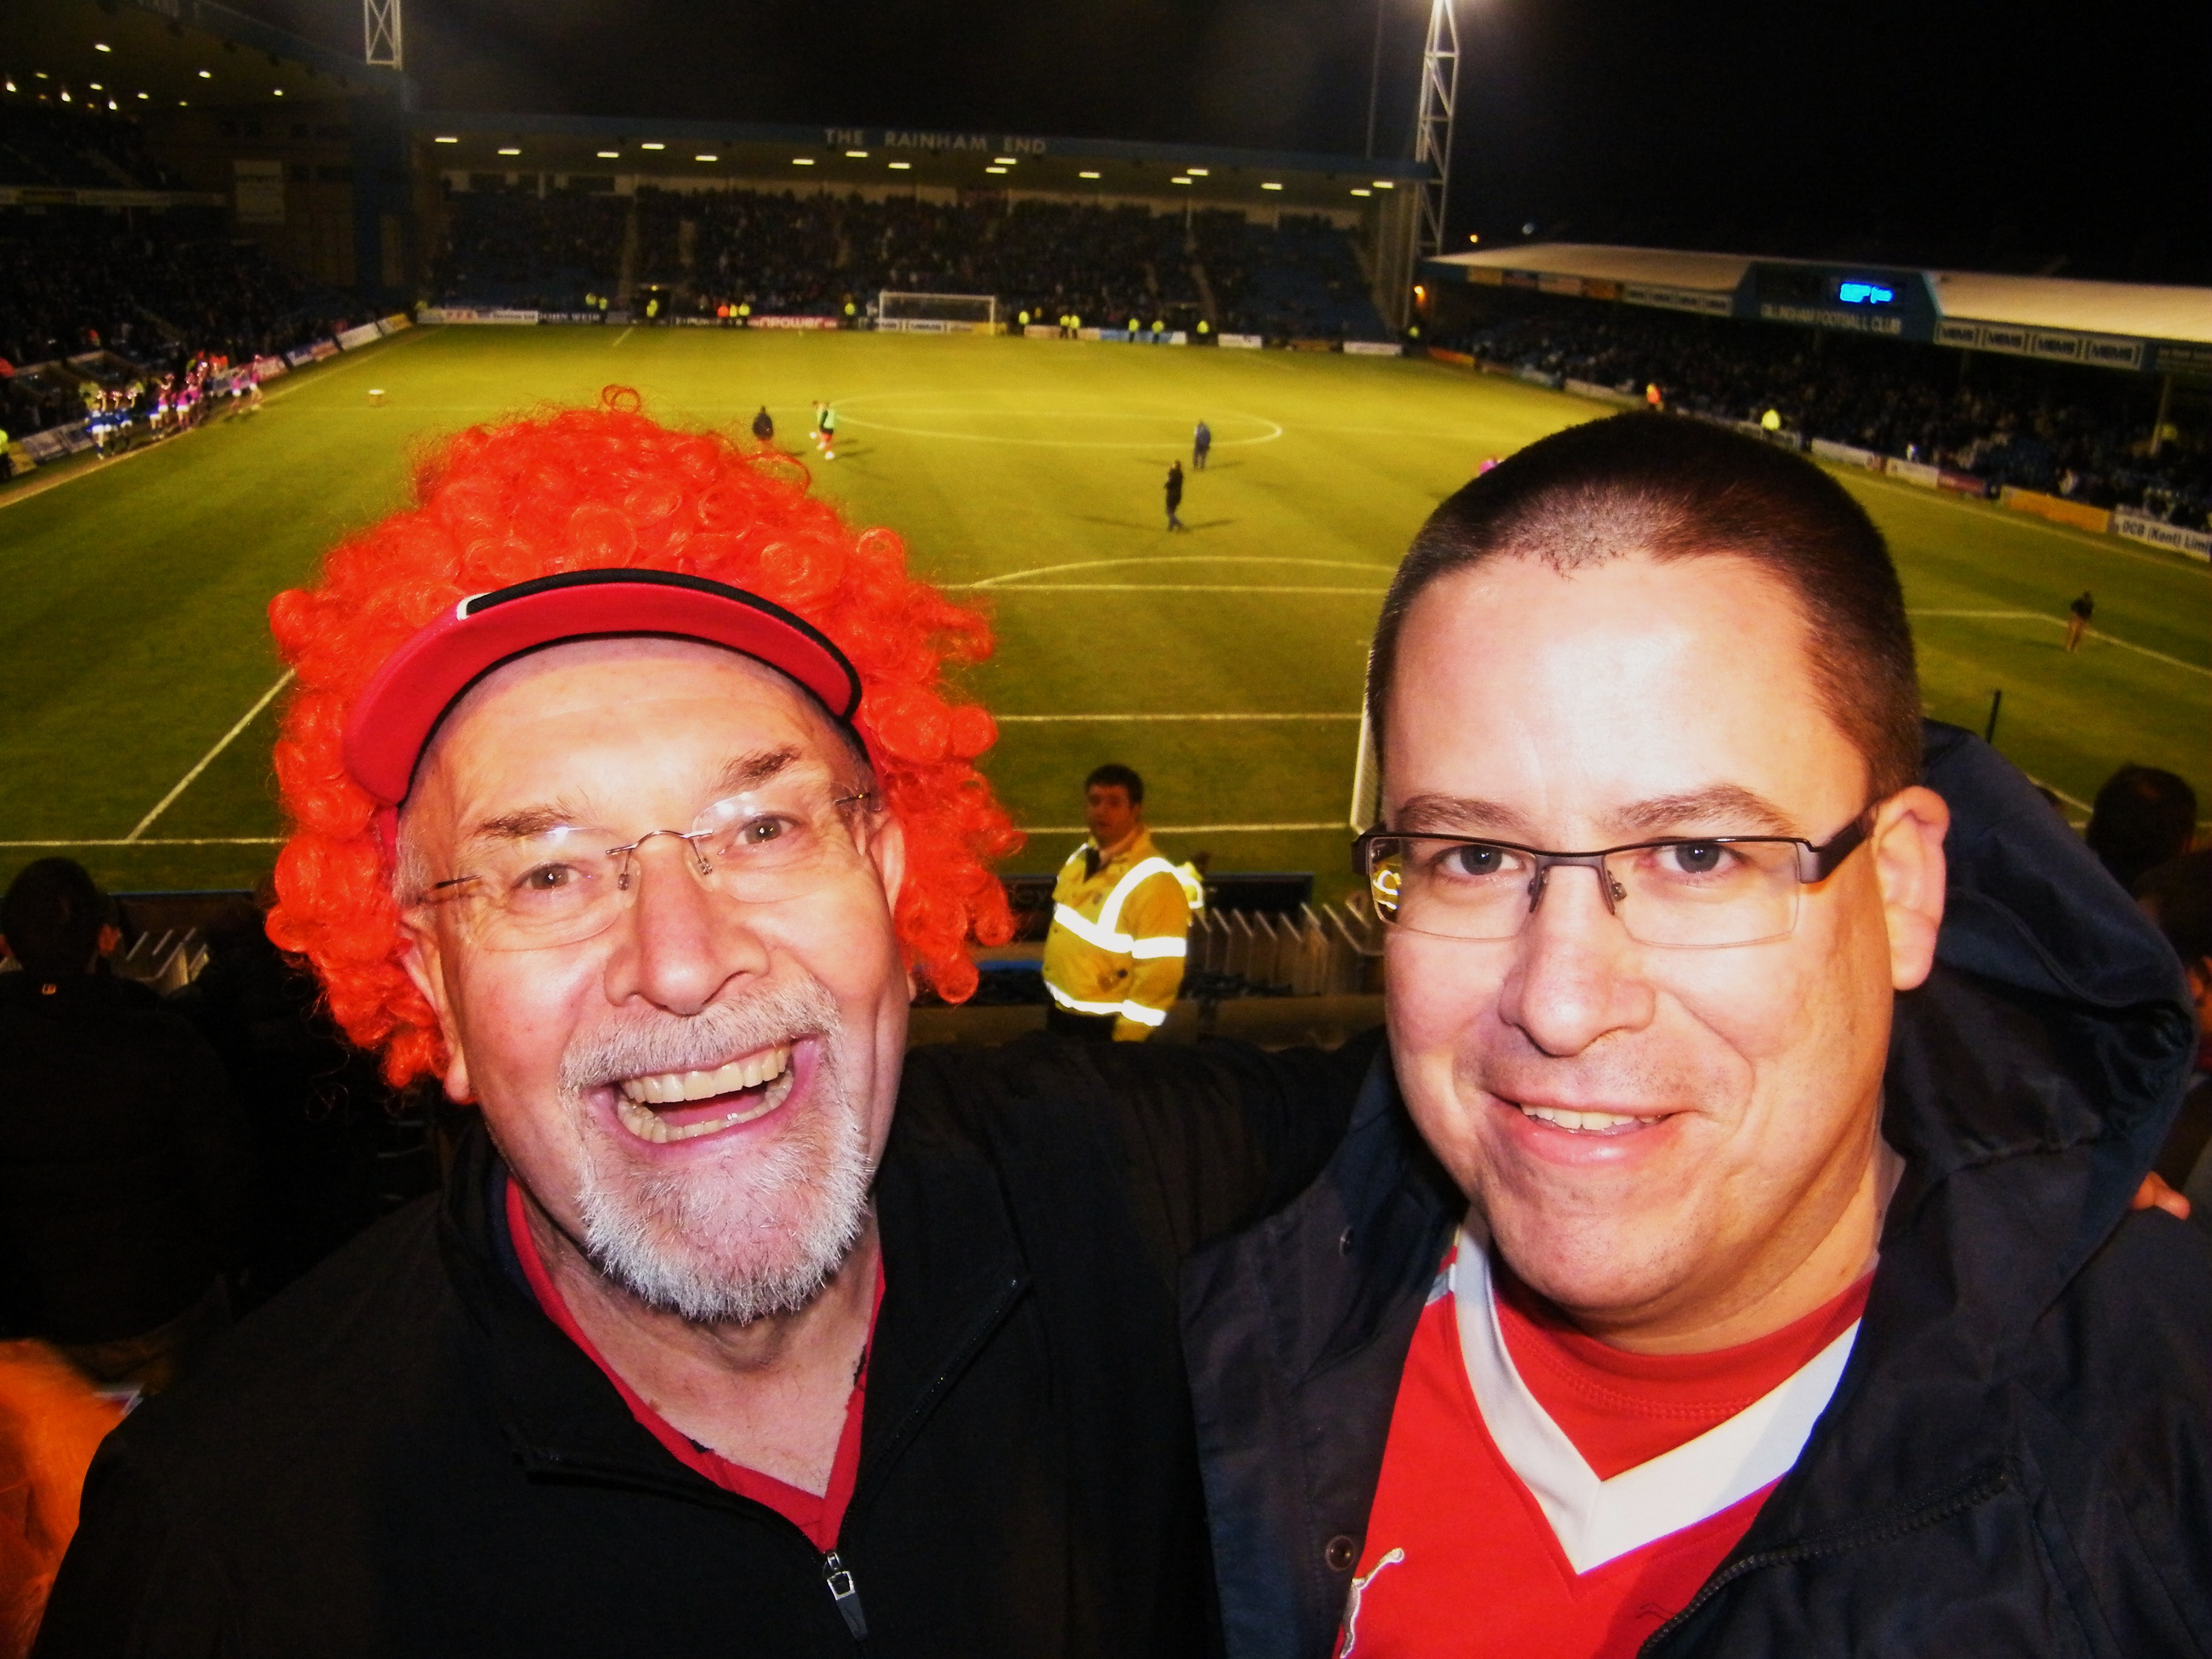 To Infinity (well, Accrington) and beyond with Ken and James, the Mystic Meg’s of CTFC!